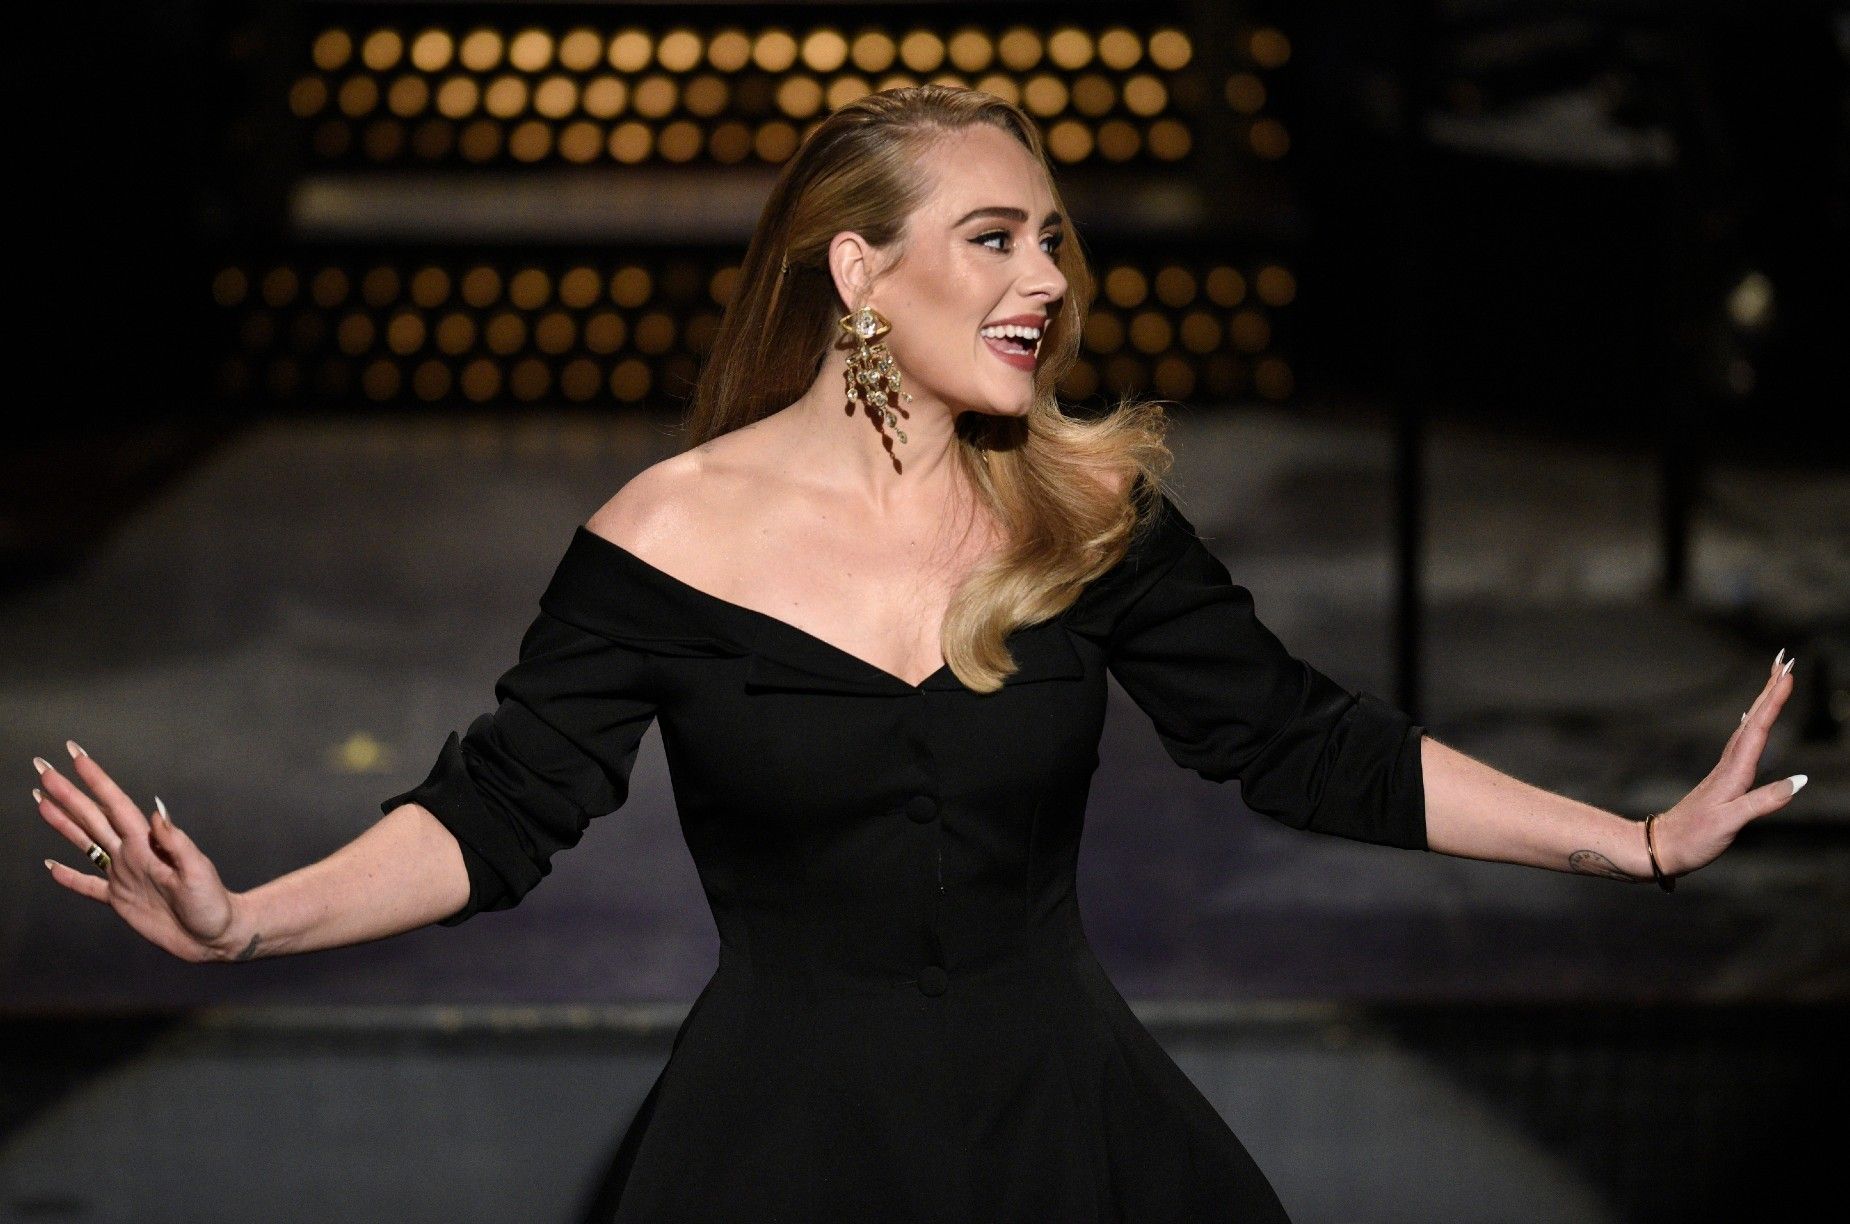 Adele copies Kate Middleton's hairstyle for SNL